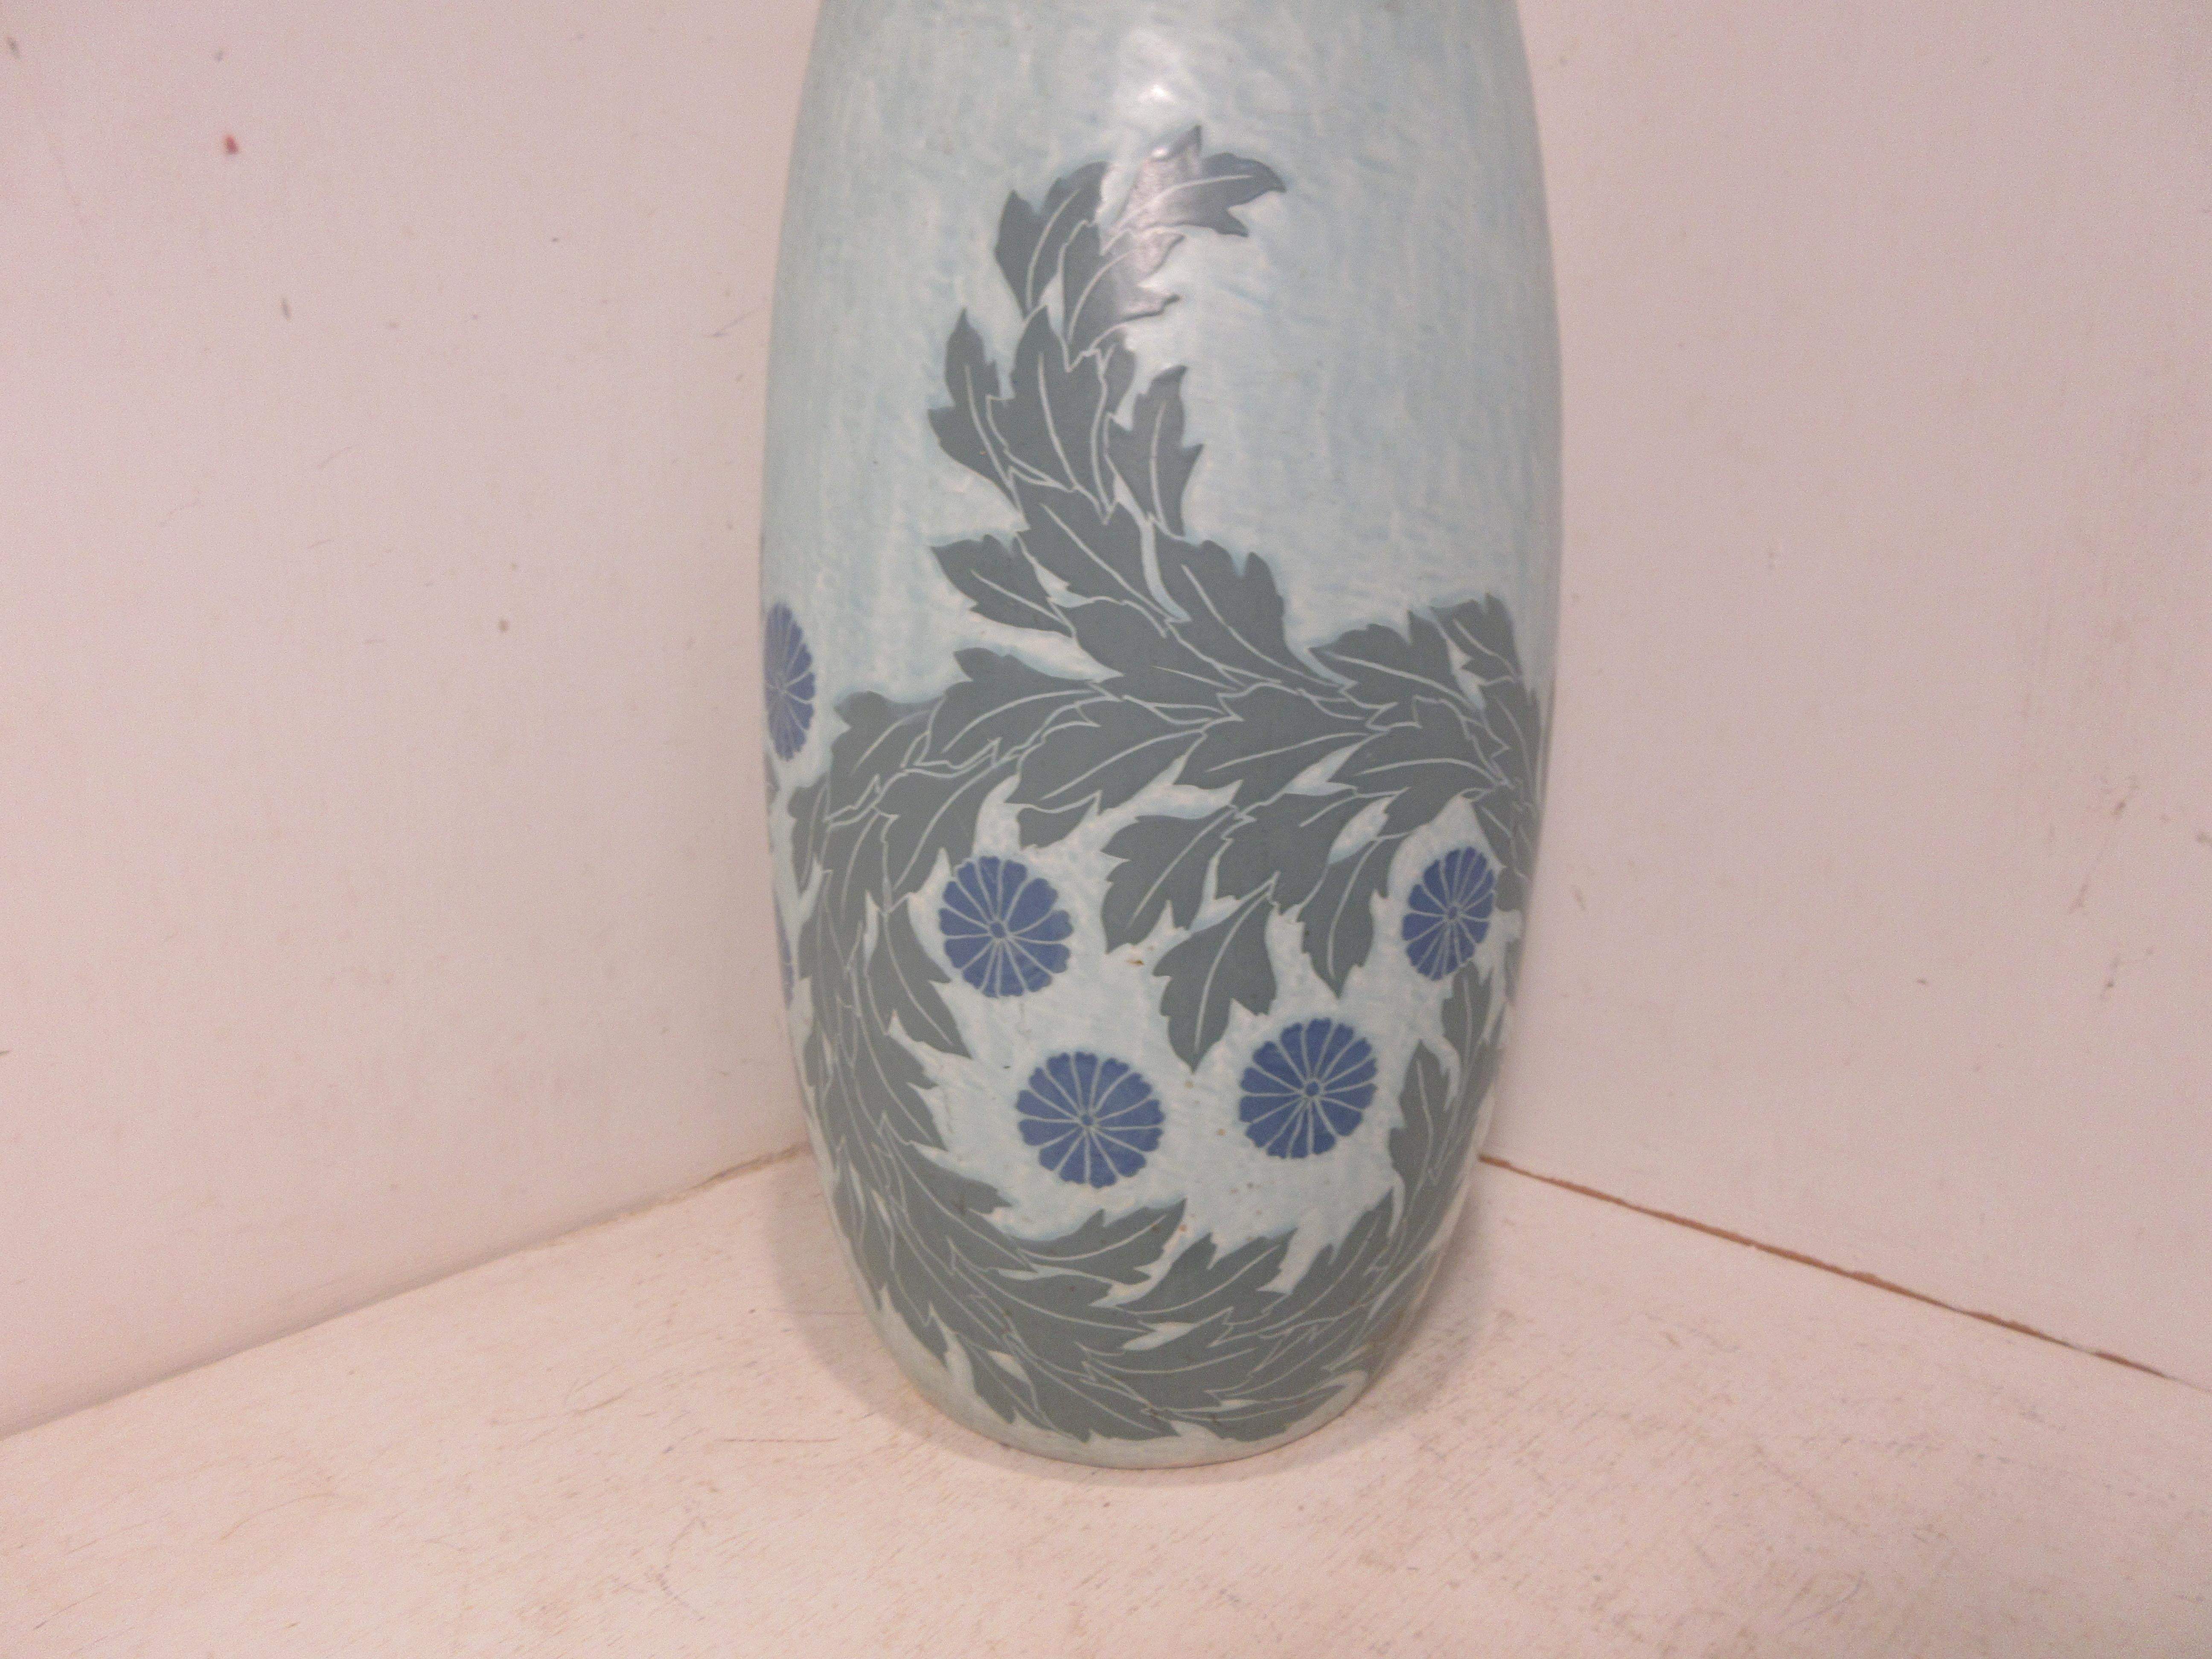 This is a handmade, 1 off Sgraffito vase made by the Swedish ceramic artist Josef Ekberg in 1911. he was one of Sweden's Top Ceramic artist at the time. He started working at the Gustavsberg foundry in 1898 till his death in 1945. His works are